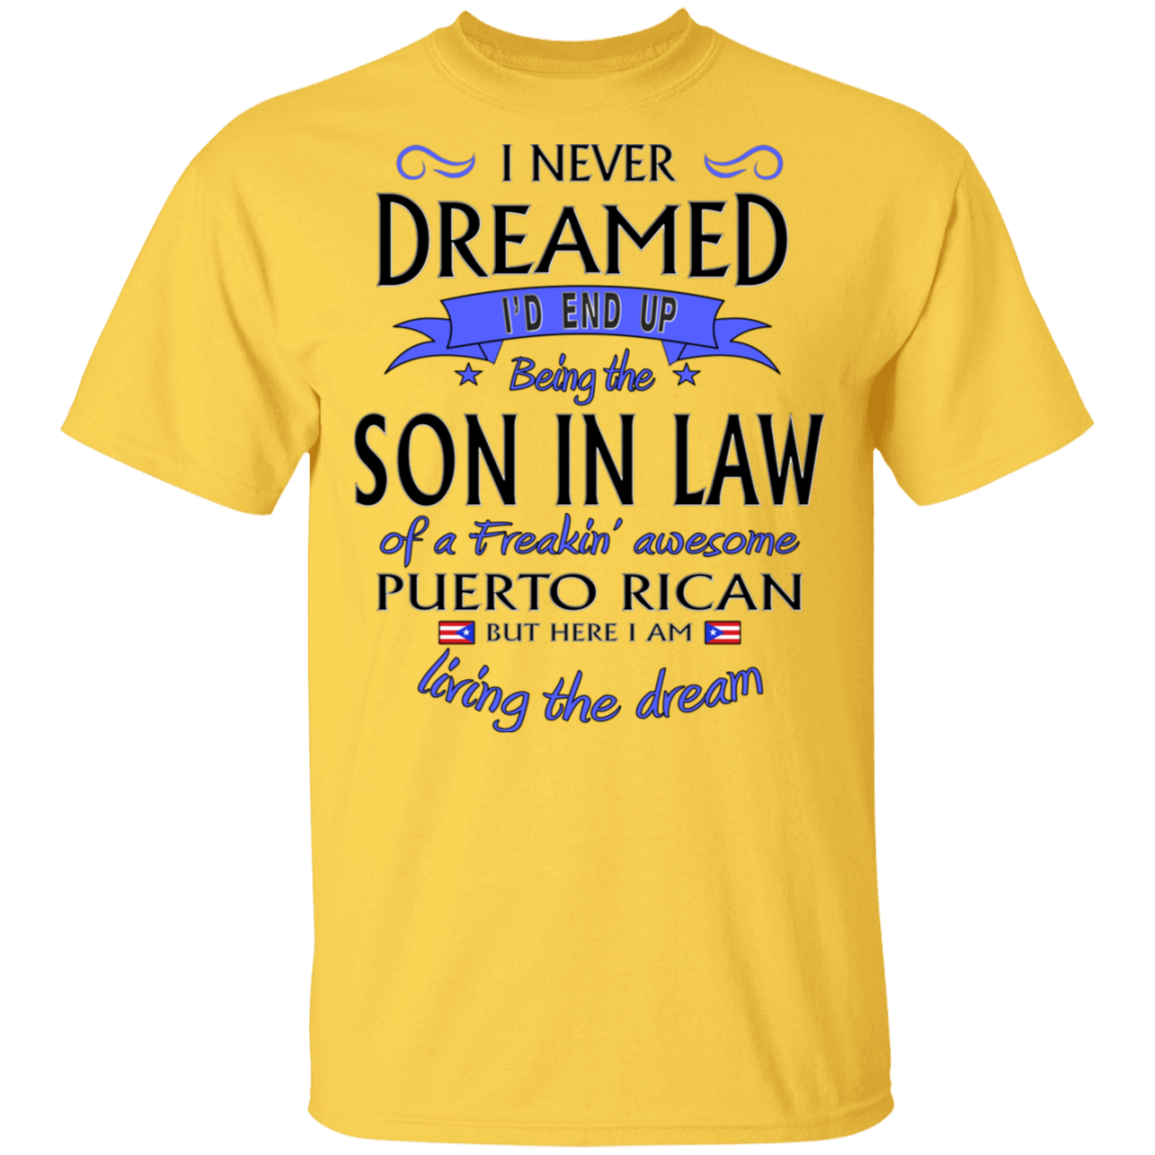 Son-In-Law of Awesome PR 5.3 oz. T-Shirt - Puerto Rican Pride